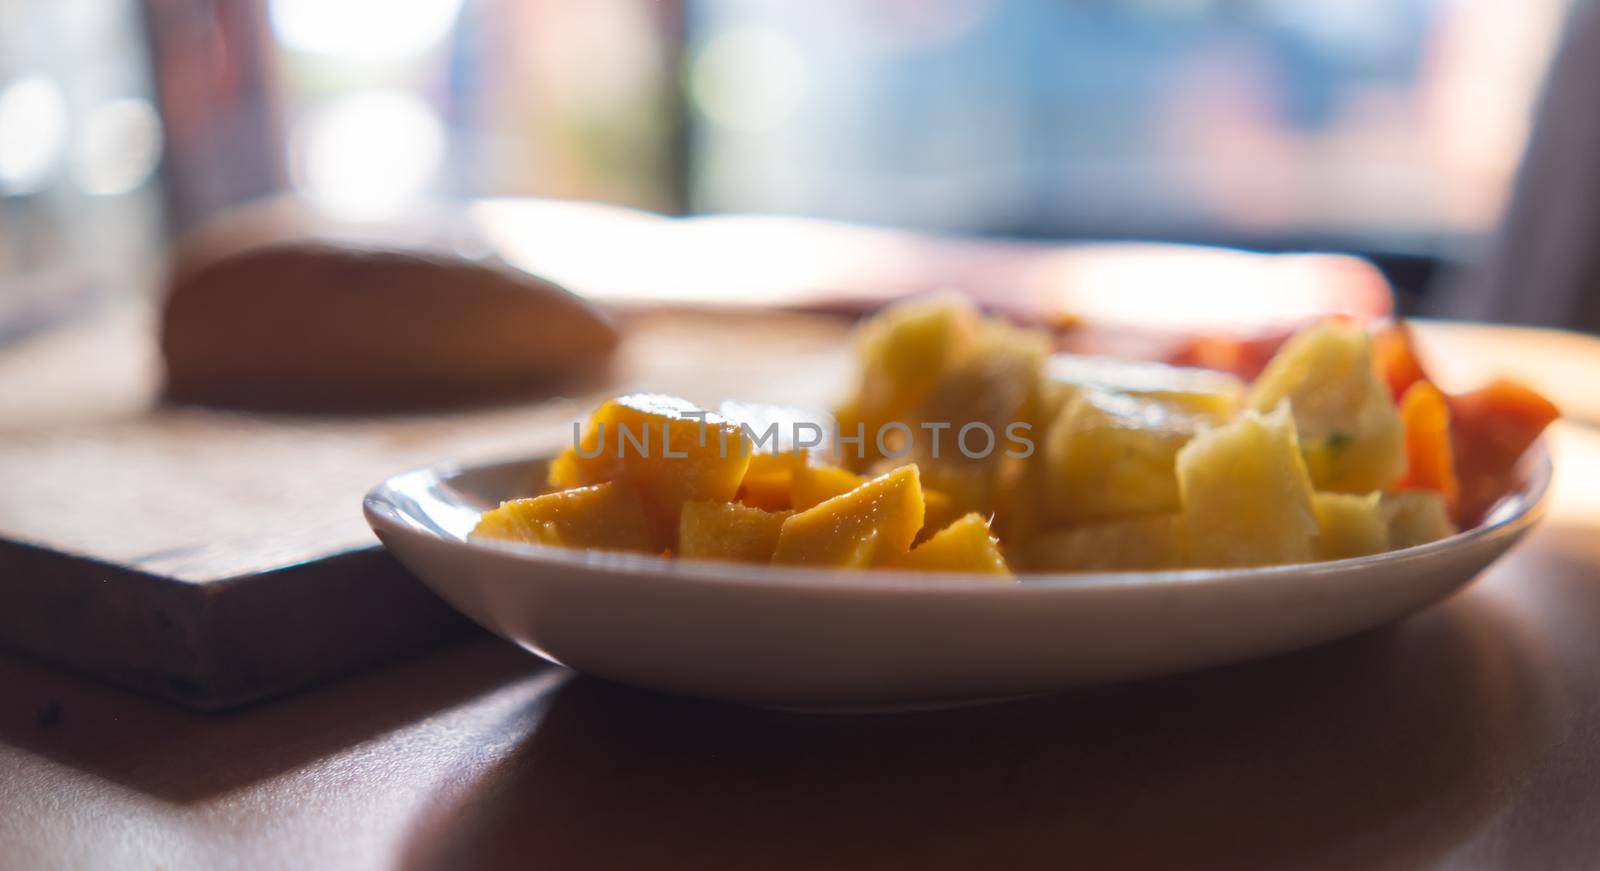 White plate of mango, pineapple, and papaya slices on table with blurry and bright background. Tasty and fresh sliced fruit on an oval porcelain plate. Healthy food and breakfast